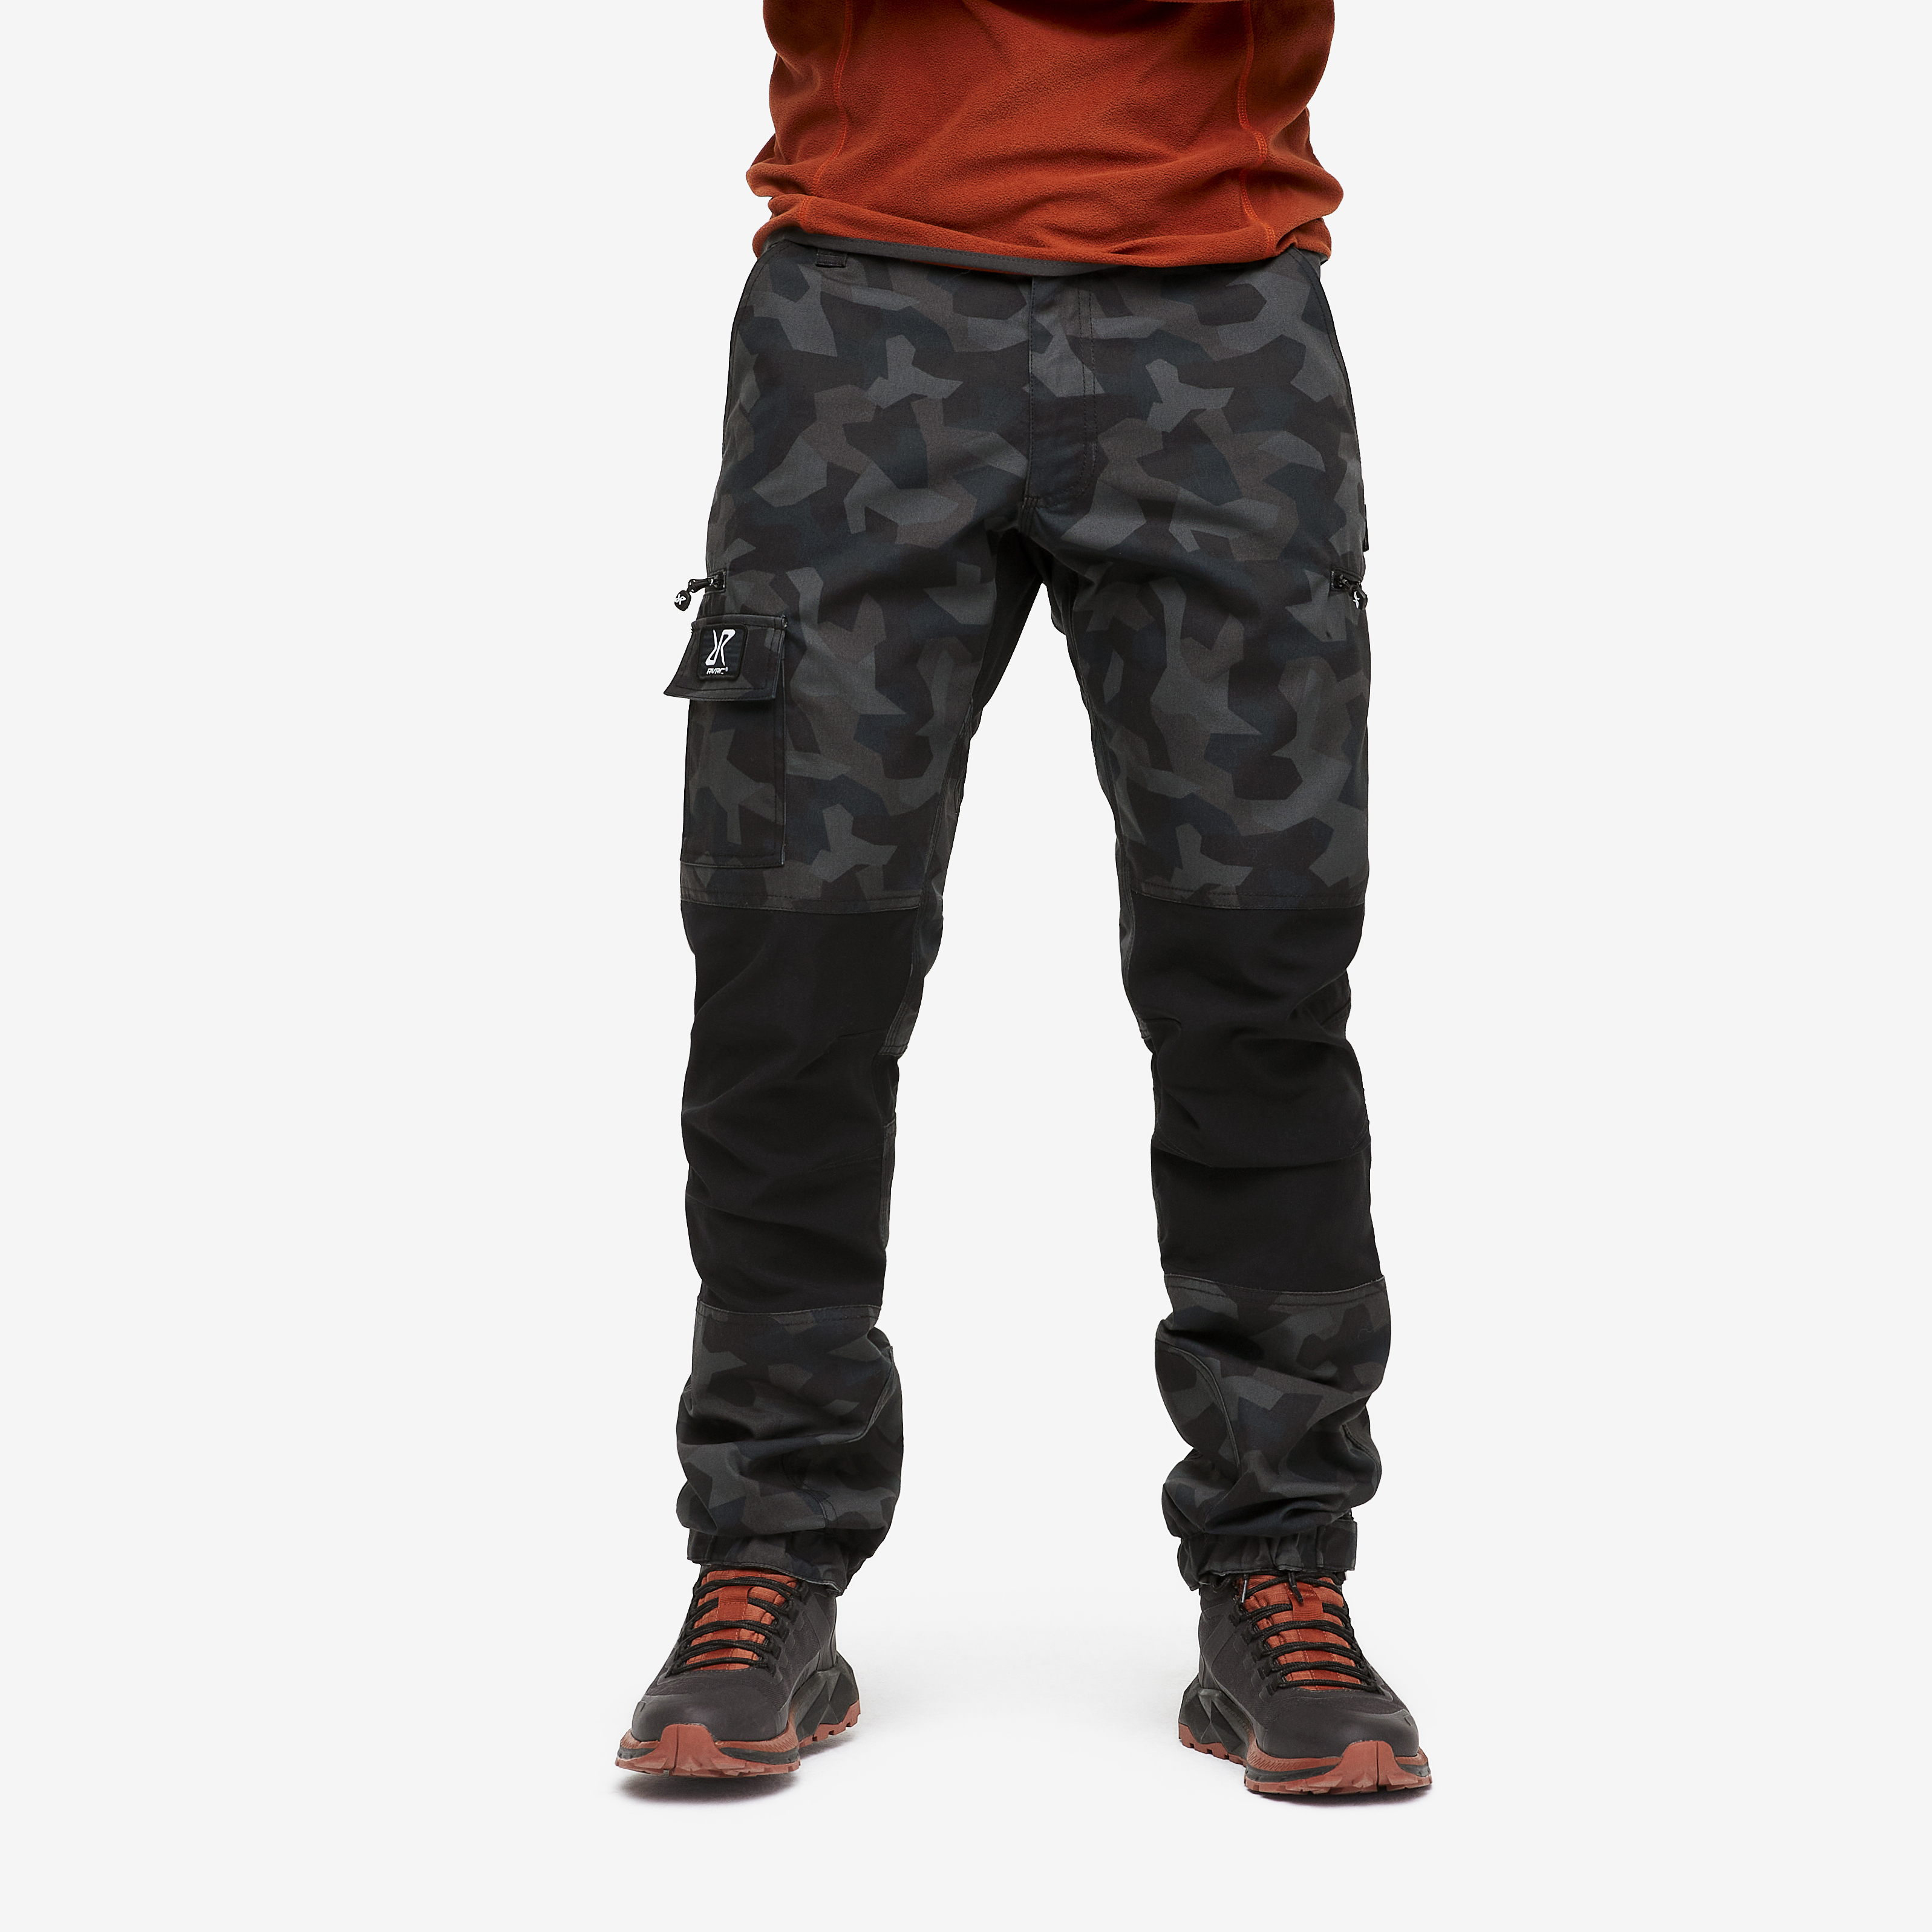 Nordwand Pants Anthracite Camo Miehet